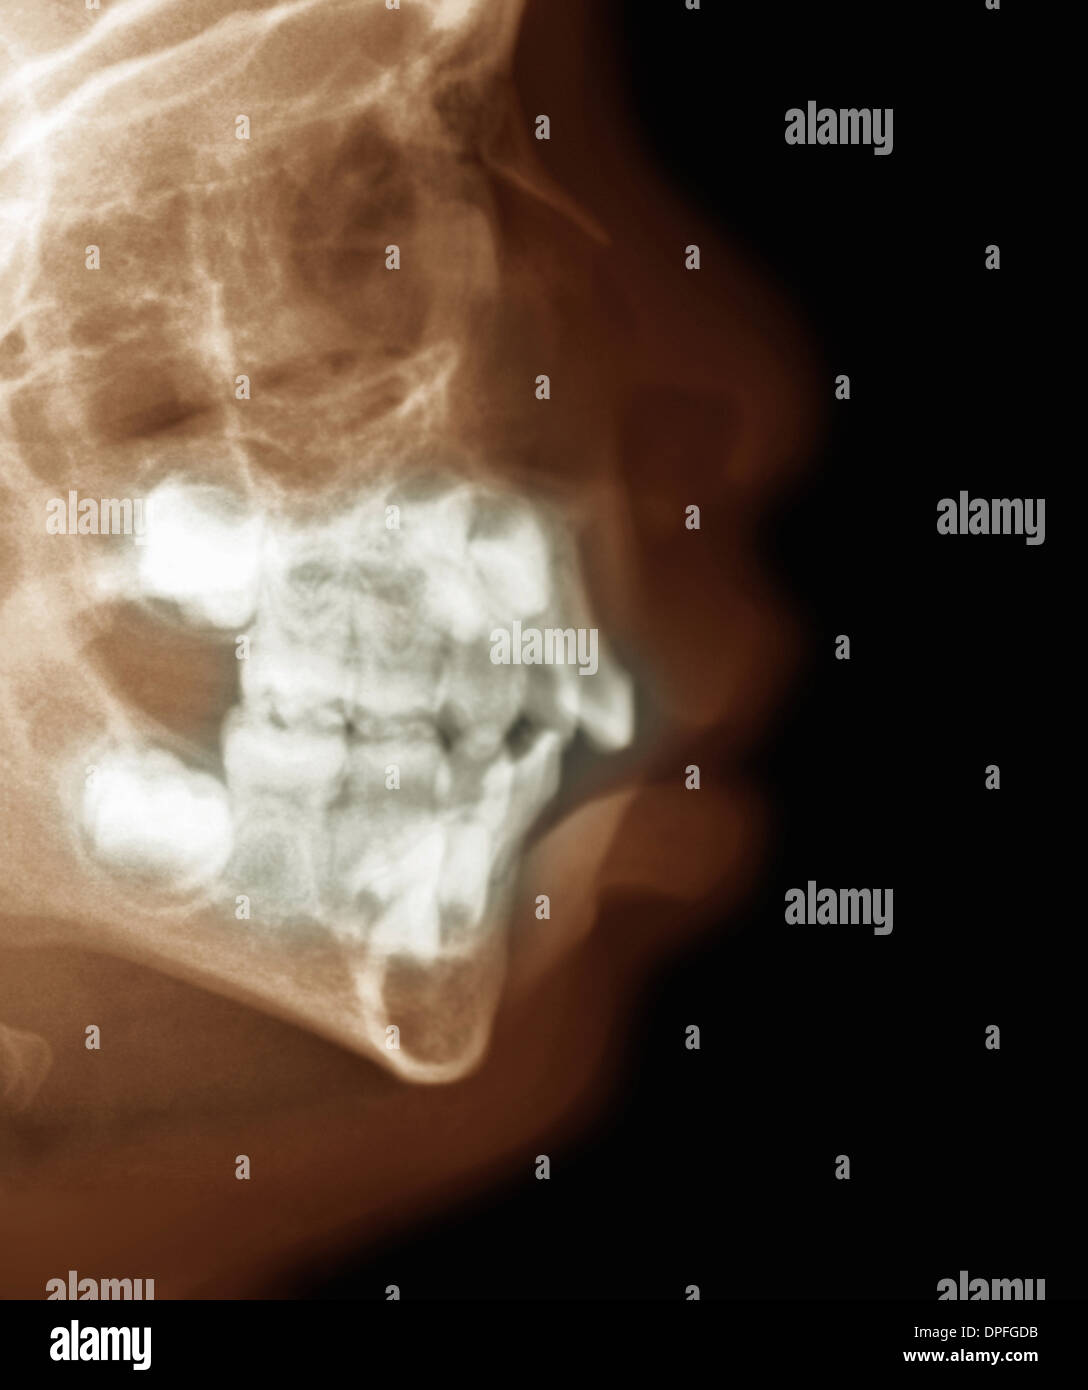 x-ray showing the head of a 2 year old boy Stock Photo